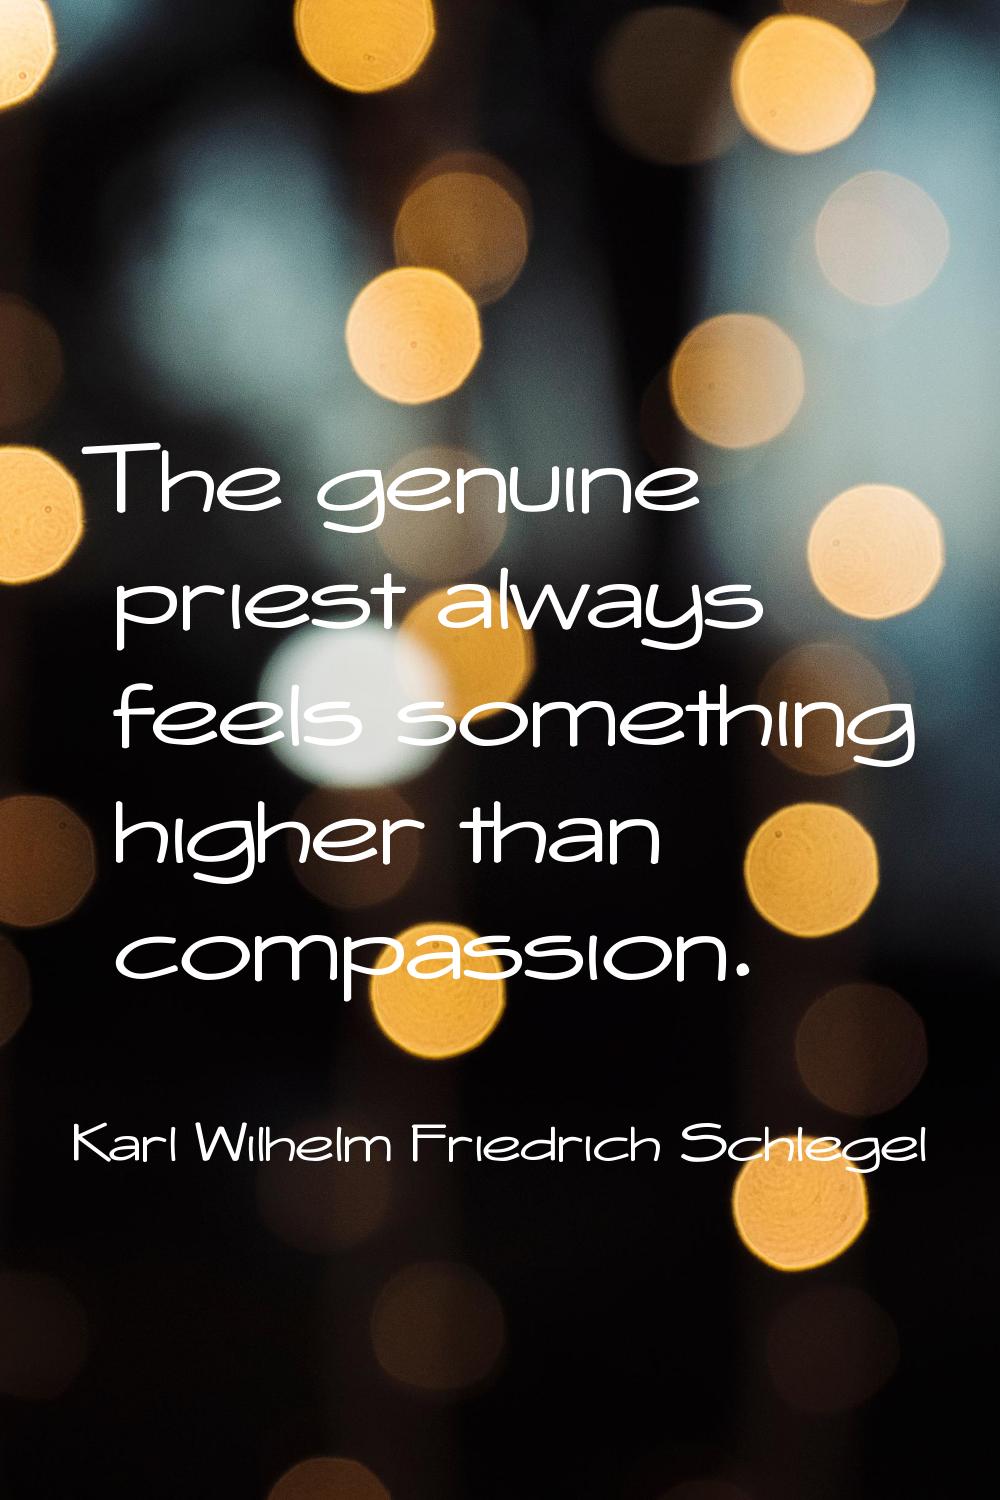 The genuine priest always feels something higher than compassion.